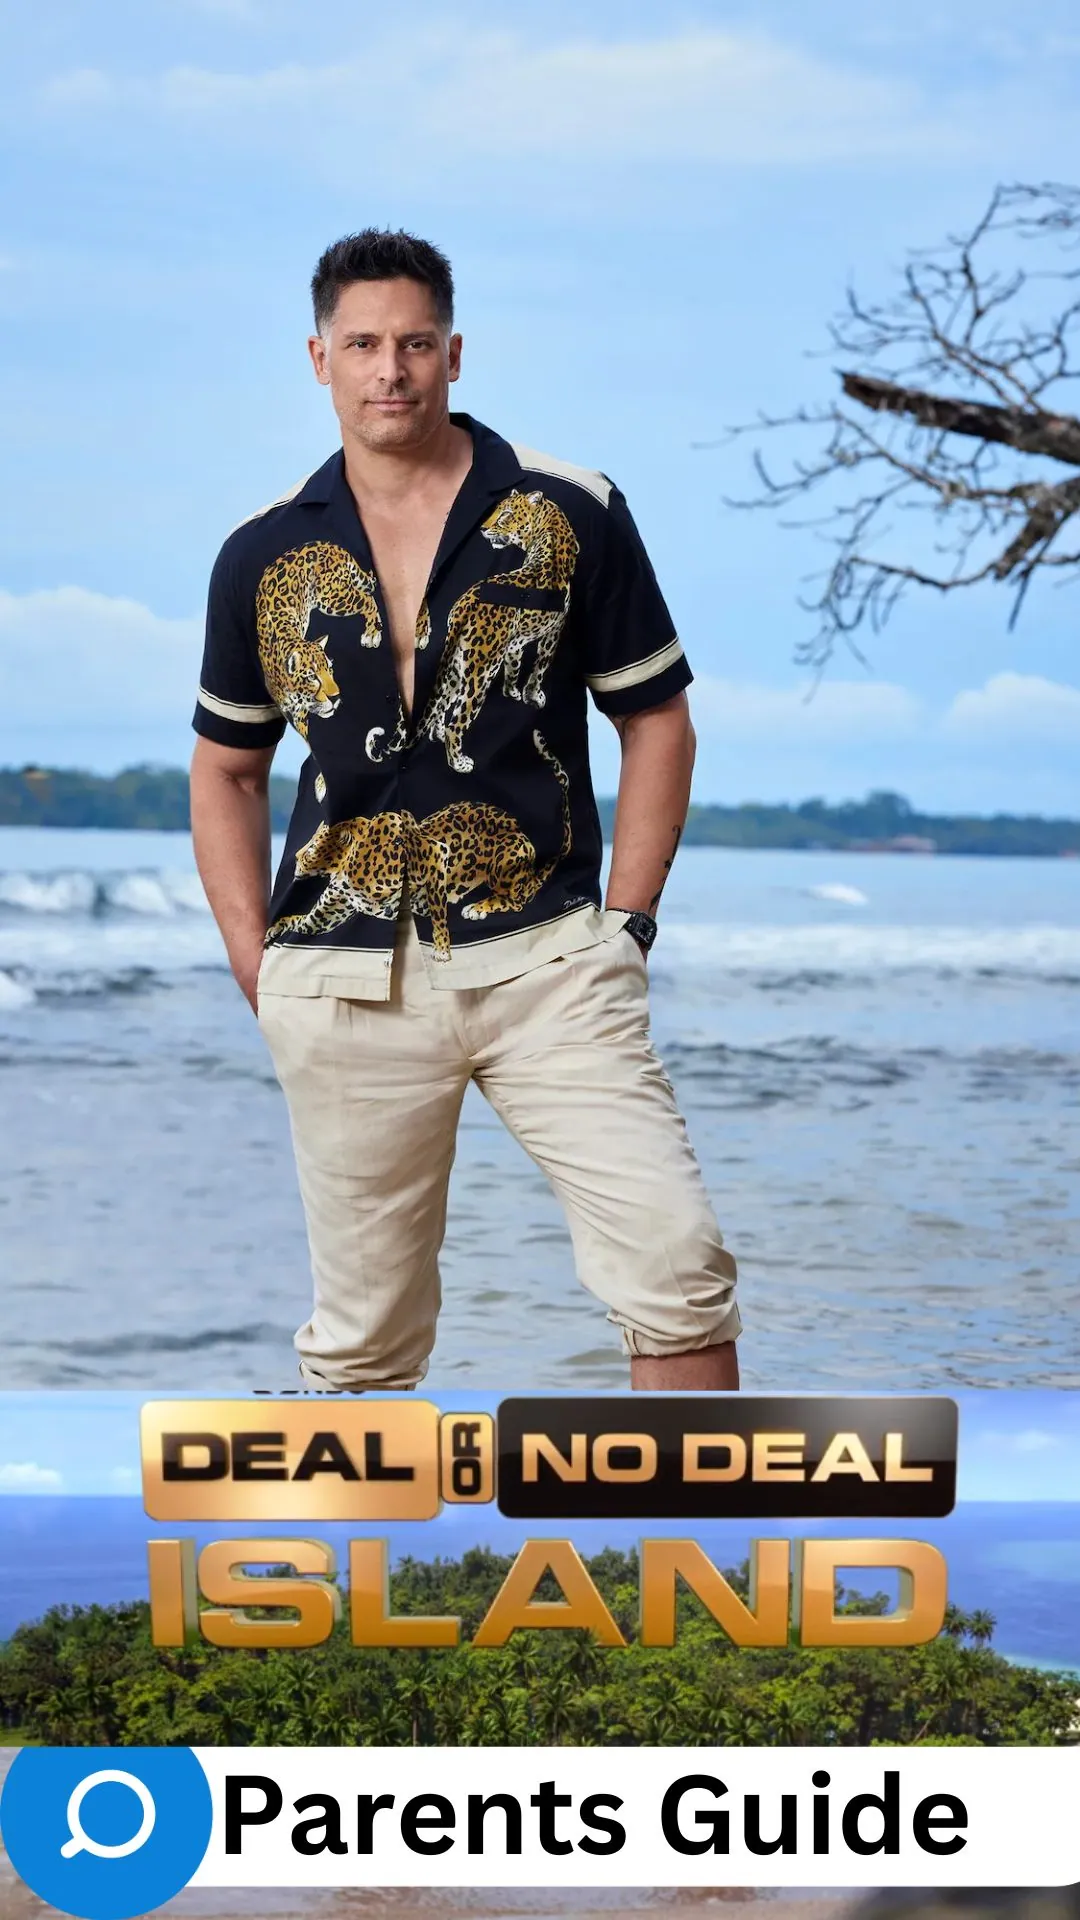 Deal or No Deal Island Parents Guide (1)